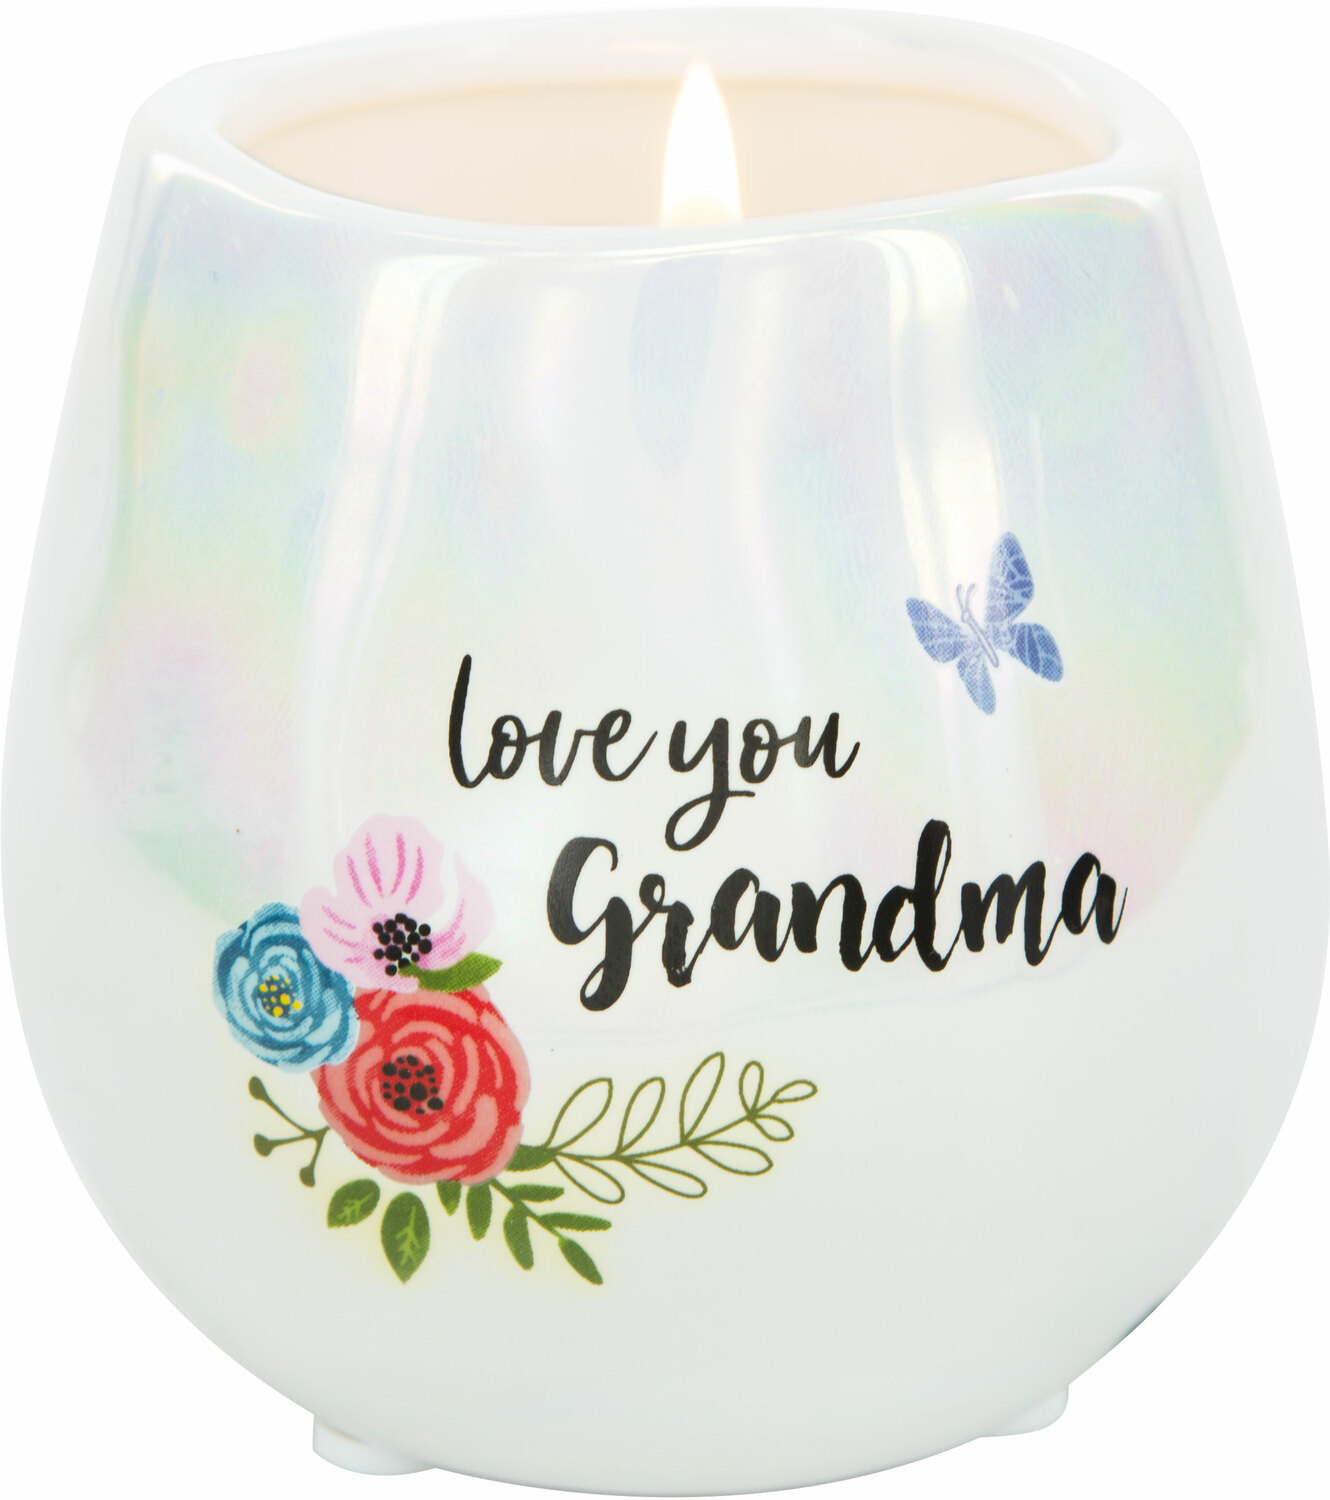 Grandma by Bunches of Love - Grandma - 8 oz - 100% Soy Wax Candle
Scent: Serenity